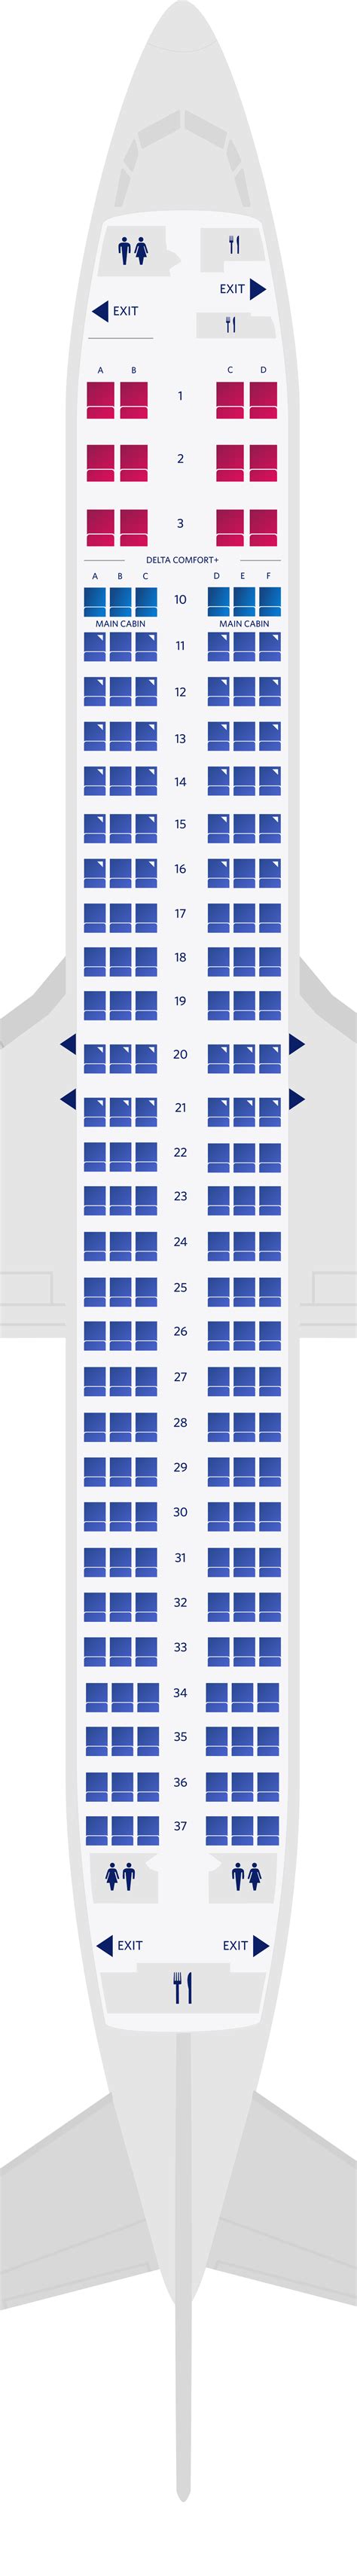 Delta 787-9 seat map. Page. Detailed seat map Virgin Atlantic Boeing B787 900. Find the best airplanes seats, information on legroom, recline and in-flight entertainment using our detailed online seating charts. 